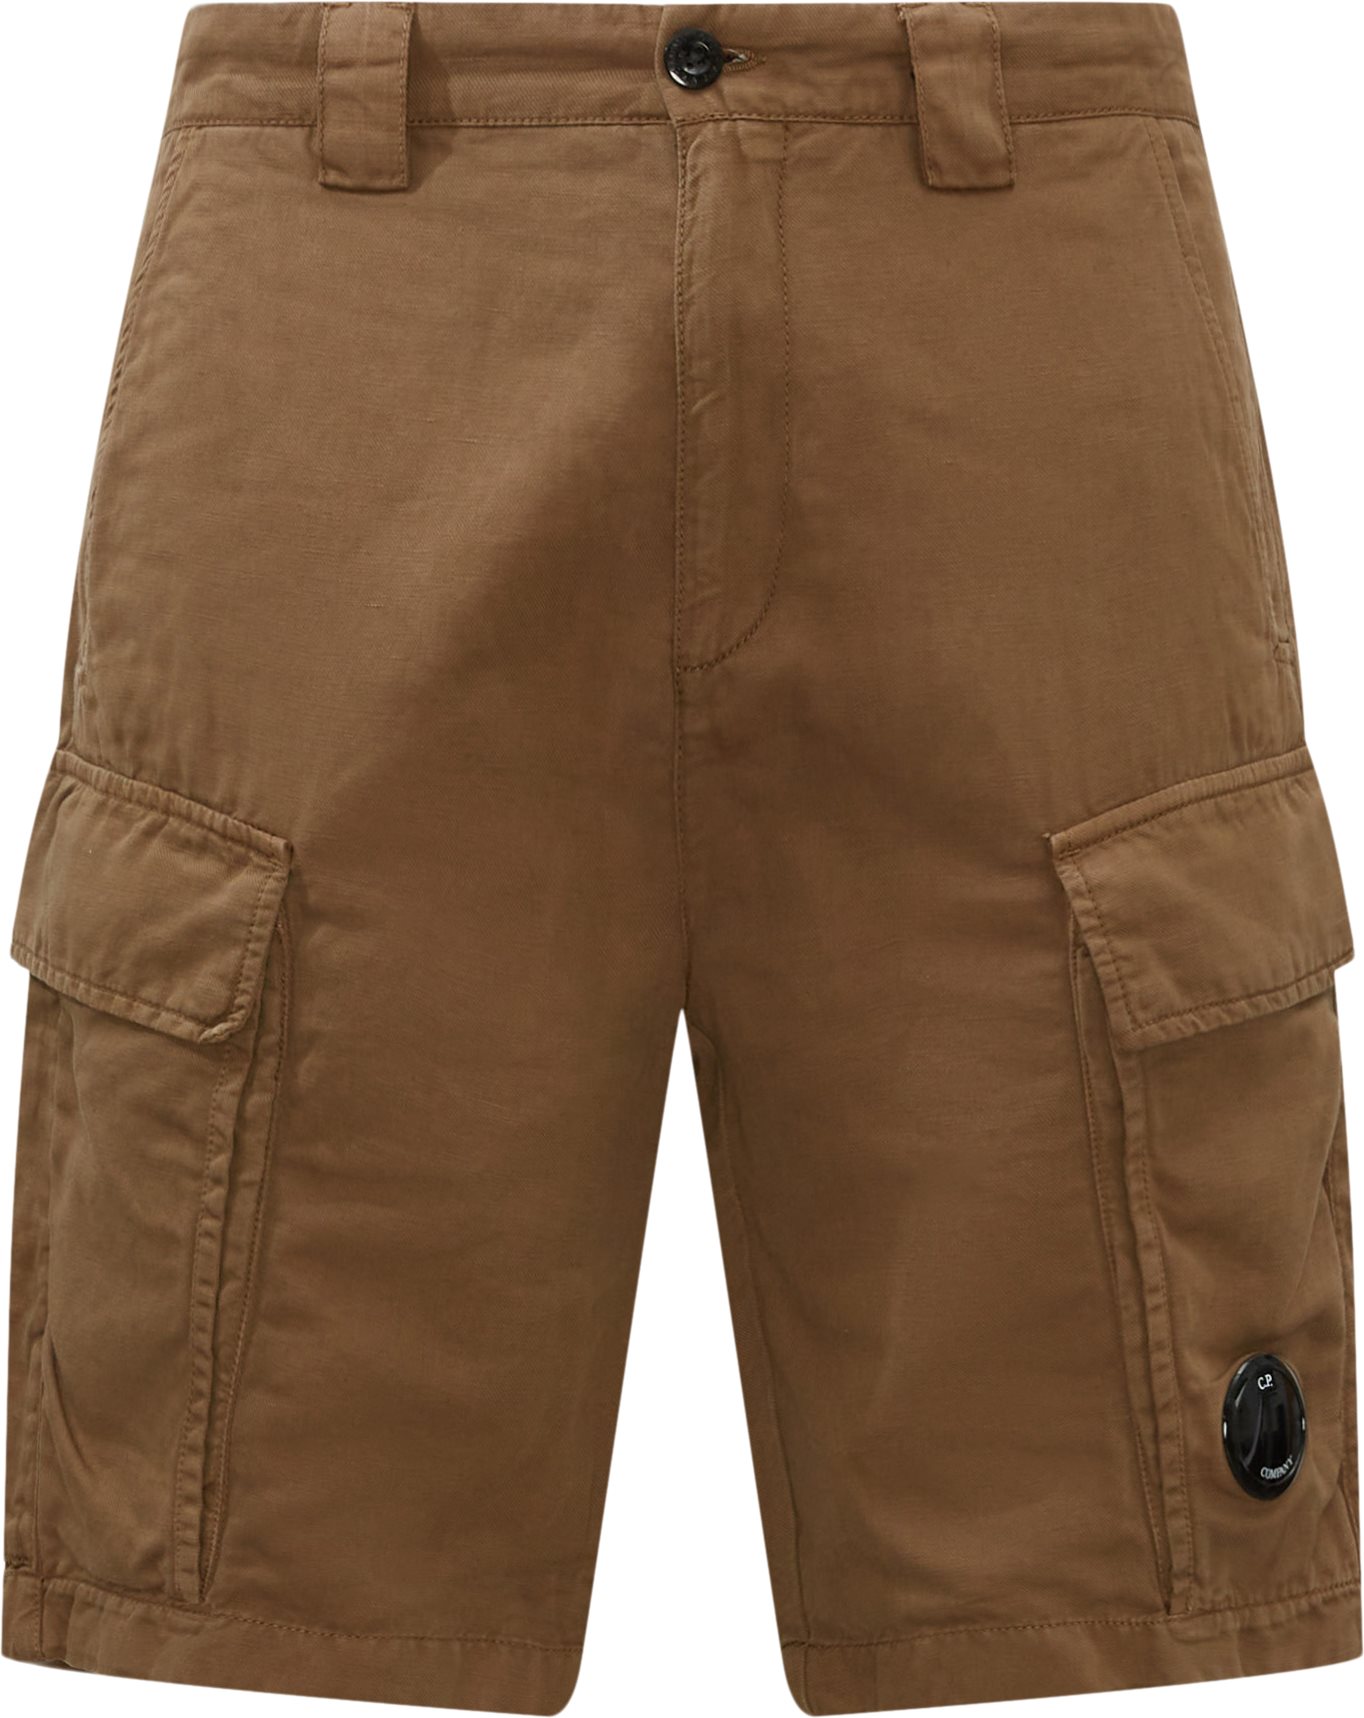 C.P. Company Shorts BE327A 6273G Brown